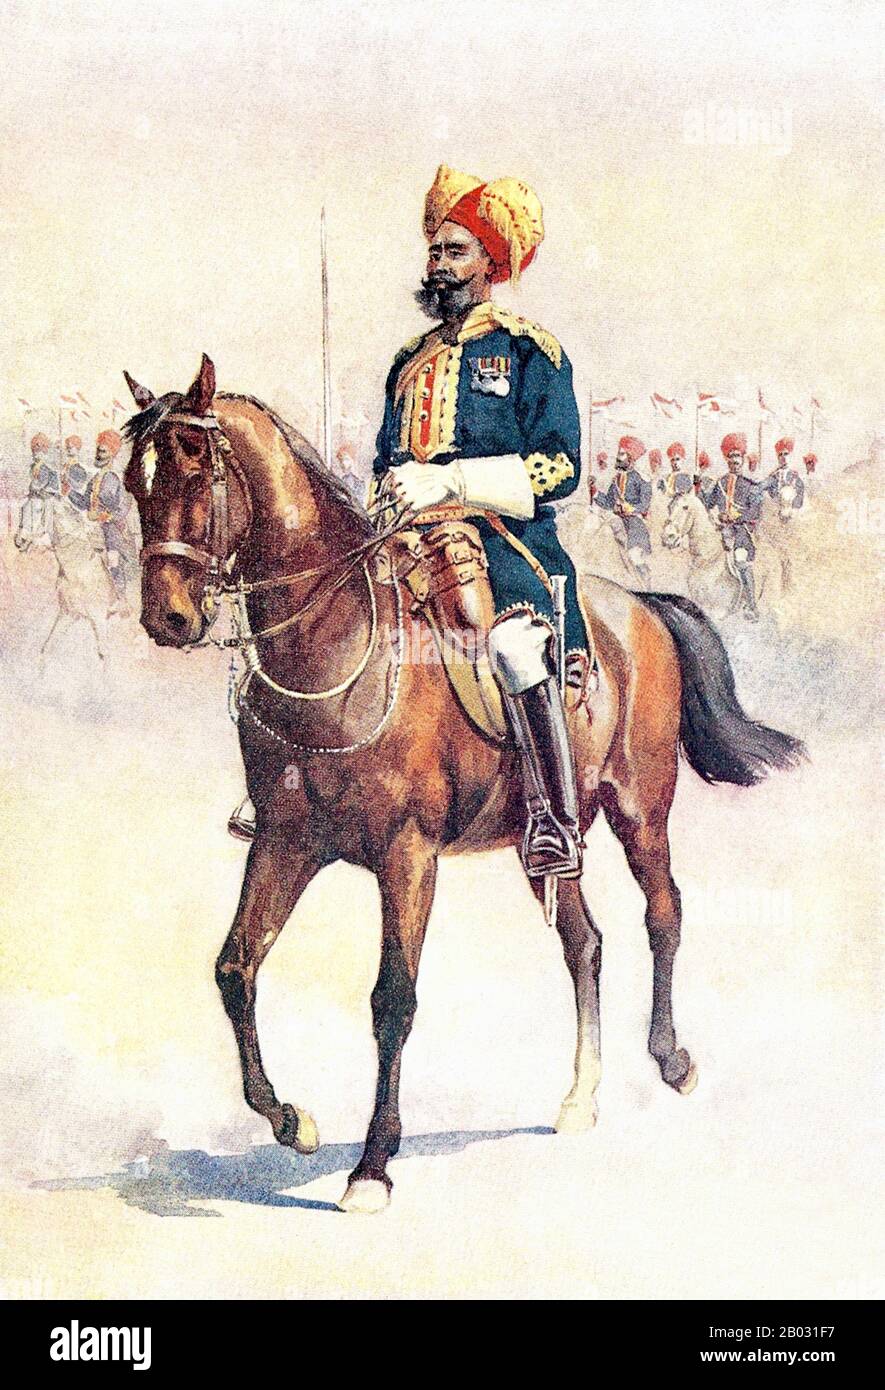 The 20th Lancers was a regiment of the British Indian Army.  It was formed in 1922 by the amalgamation of the 14th Murray's Jat Lancers and the 15th Lancers (Cureton's Multanis). Stock Photo